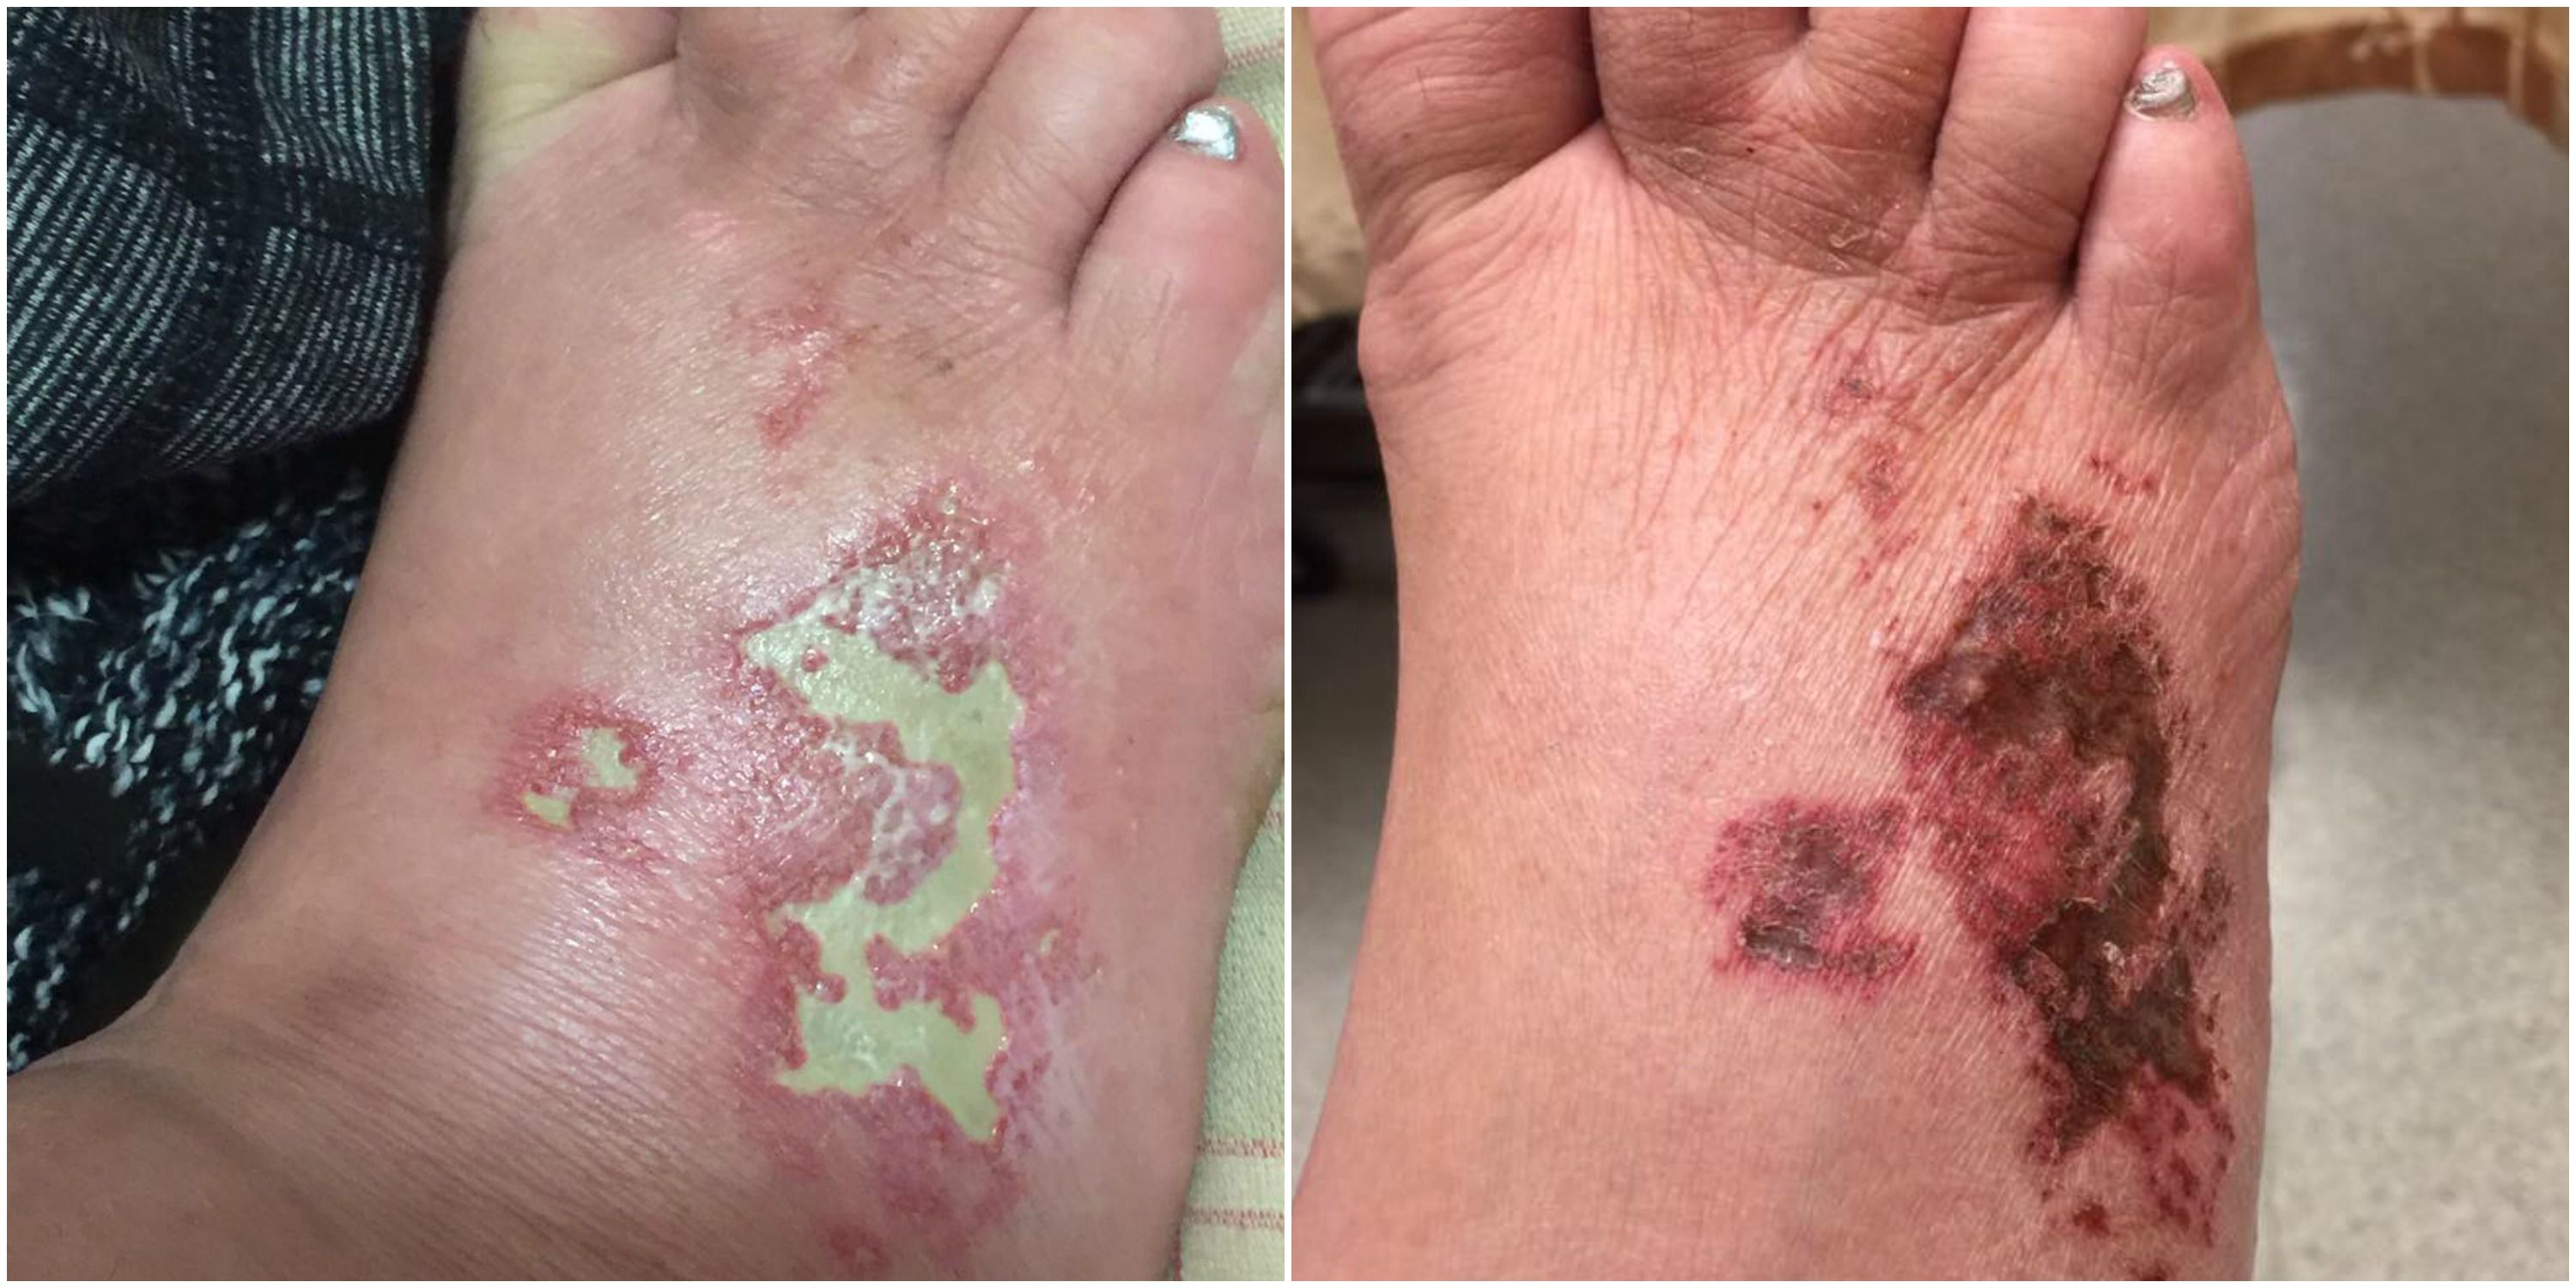 Woman Says She Suffered Horrifying Burns On Her Foot During Salon